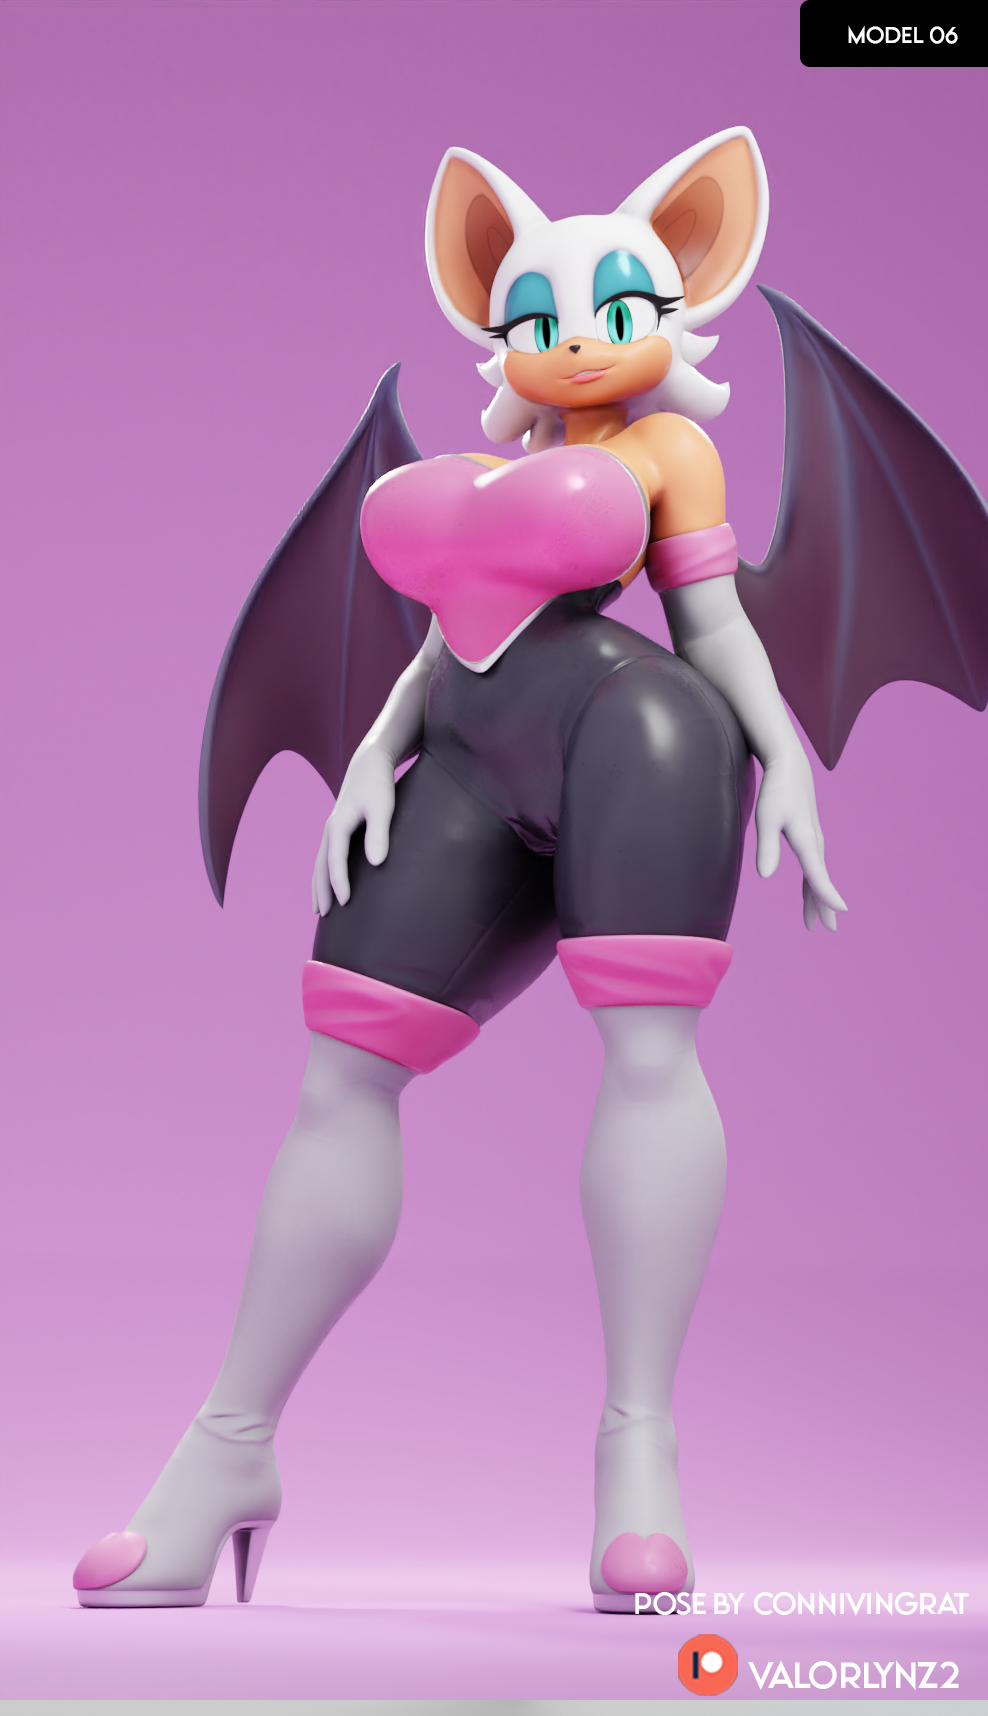 rouge_model_6_2.png